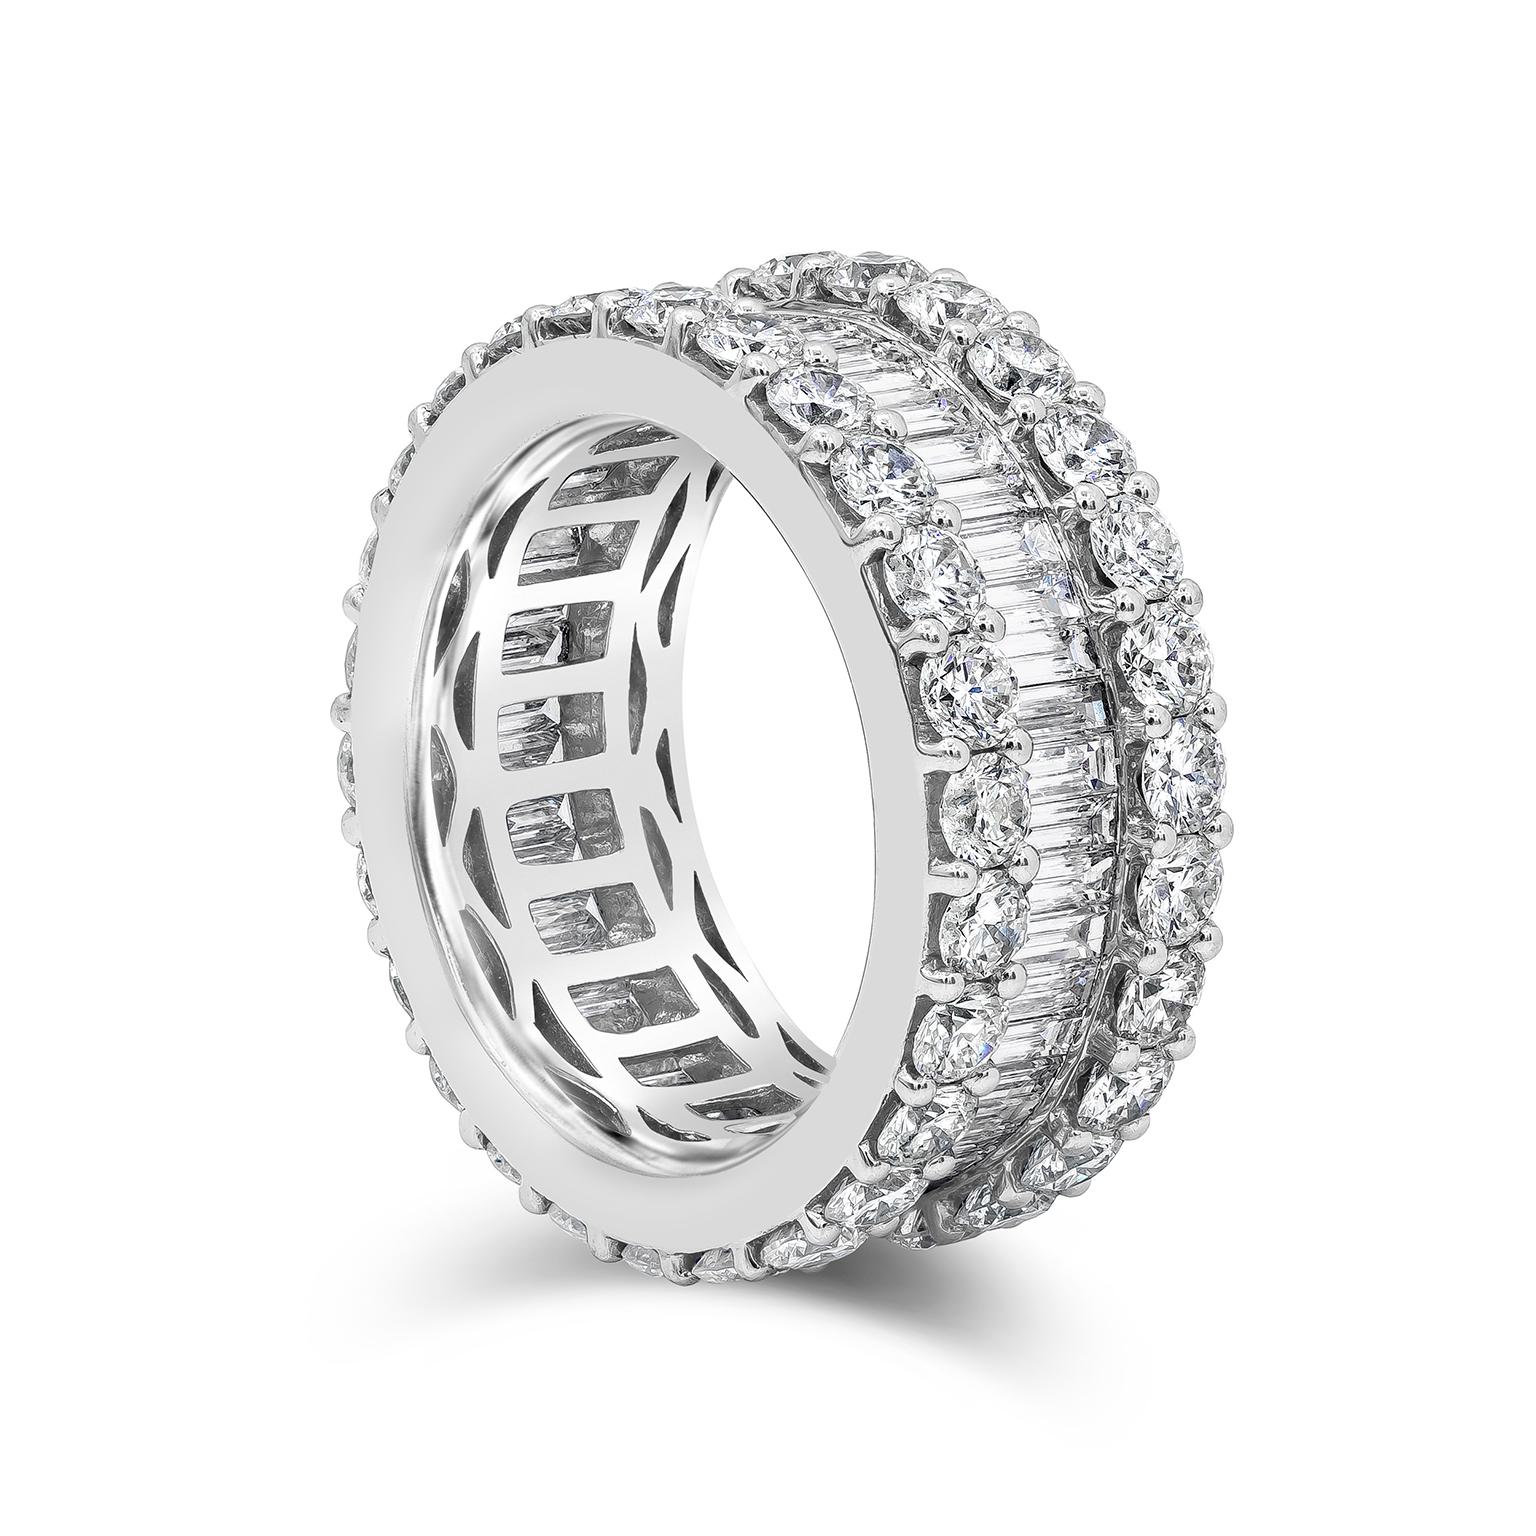 An appealing eternity wedding band showcasing 5.82 carats total diamonds. Set in the center are beautifully matched baguette diamonds weighing 1.96 carats total, Flanked on each side is a row of brilliant round diamonds weighing 3.86 carats total.